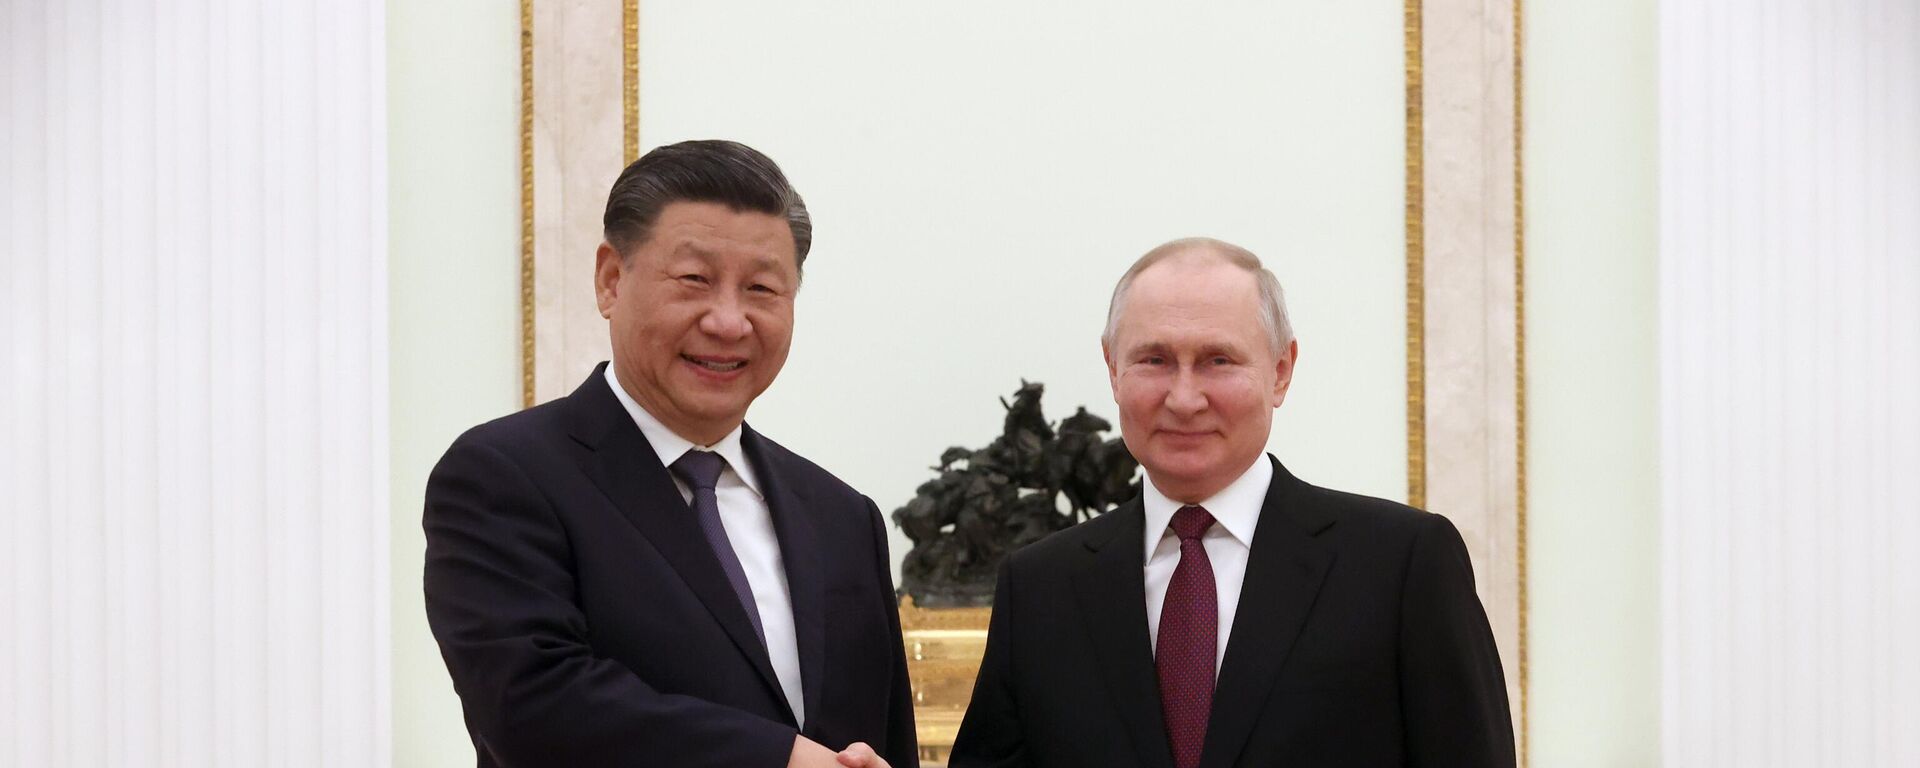 Chinese President Xi Jinping and Russian President Vladimir Putin shake hands during their meeting at the Kremlin in Moscow, Russia. - Sputnik International, 1920, 19.10.2023